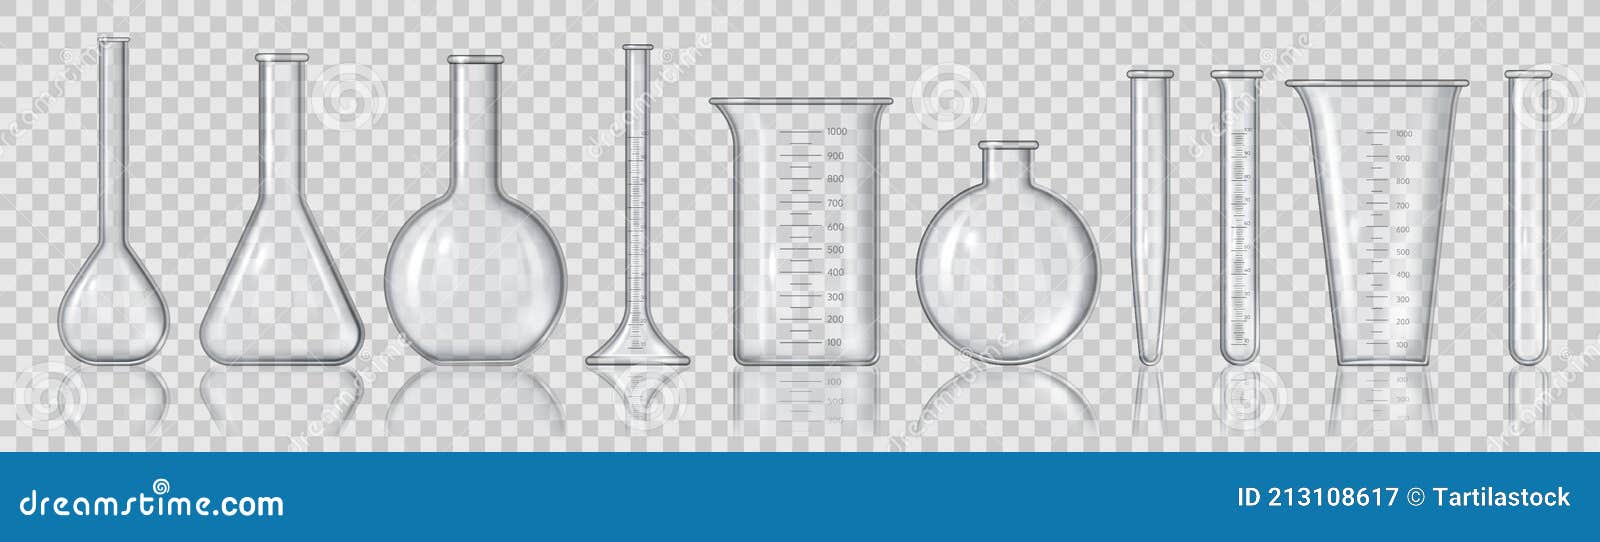 realistic beakers and flasks. 3d empty laboratory measuring equipment, glass tubes for medicine, bottles and chemistry